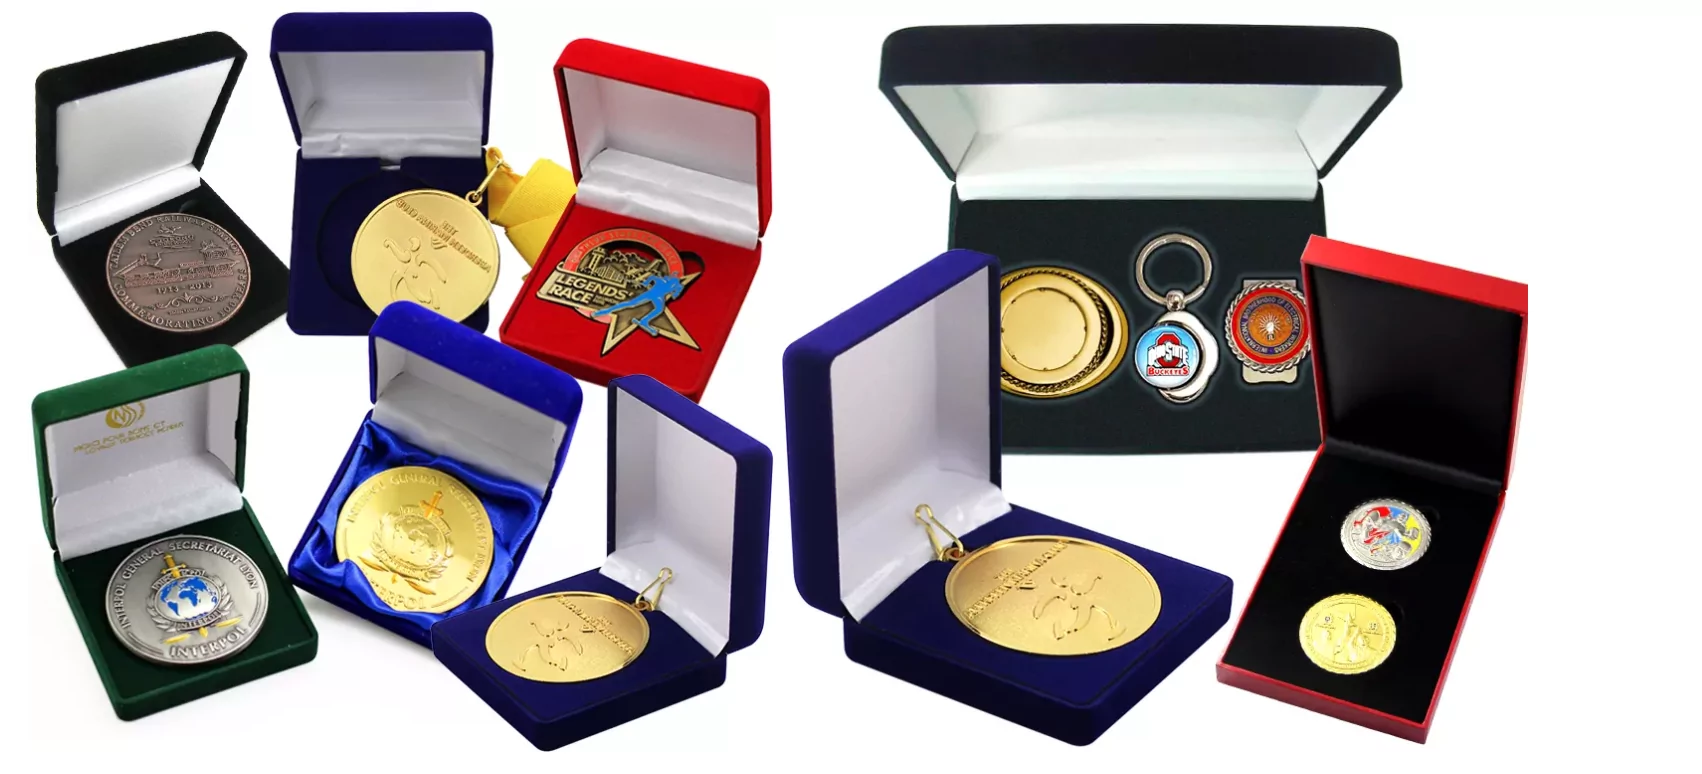 Charity Medals & Pin Badges